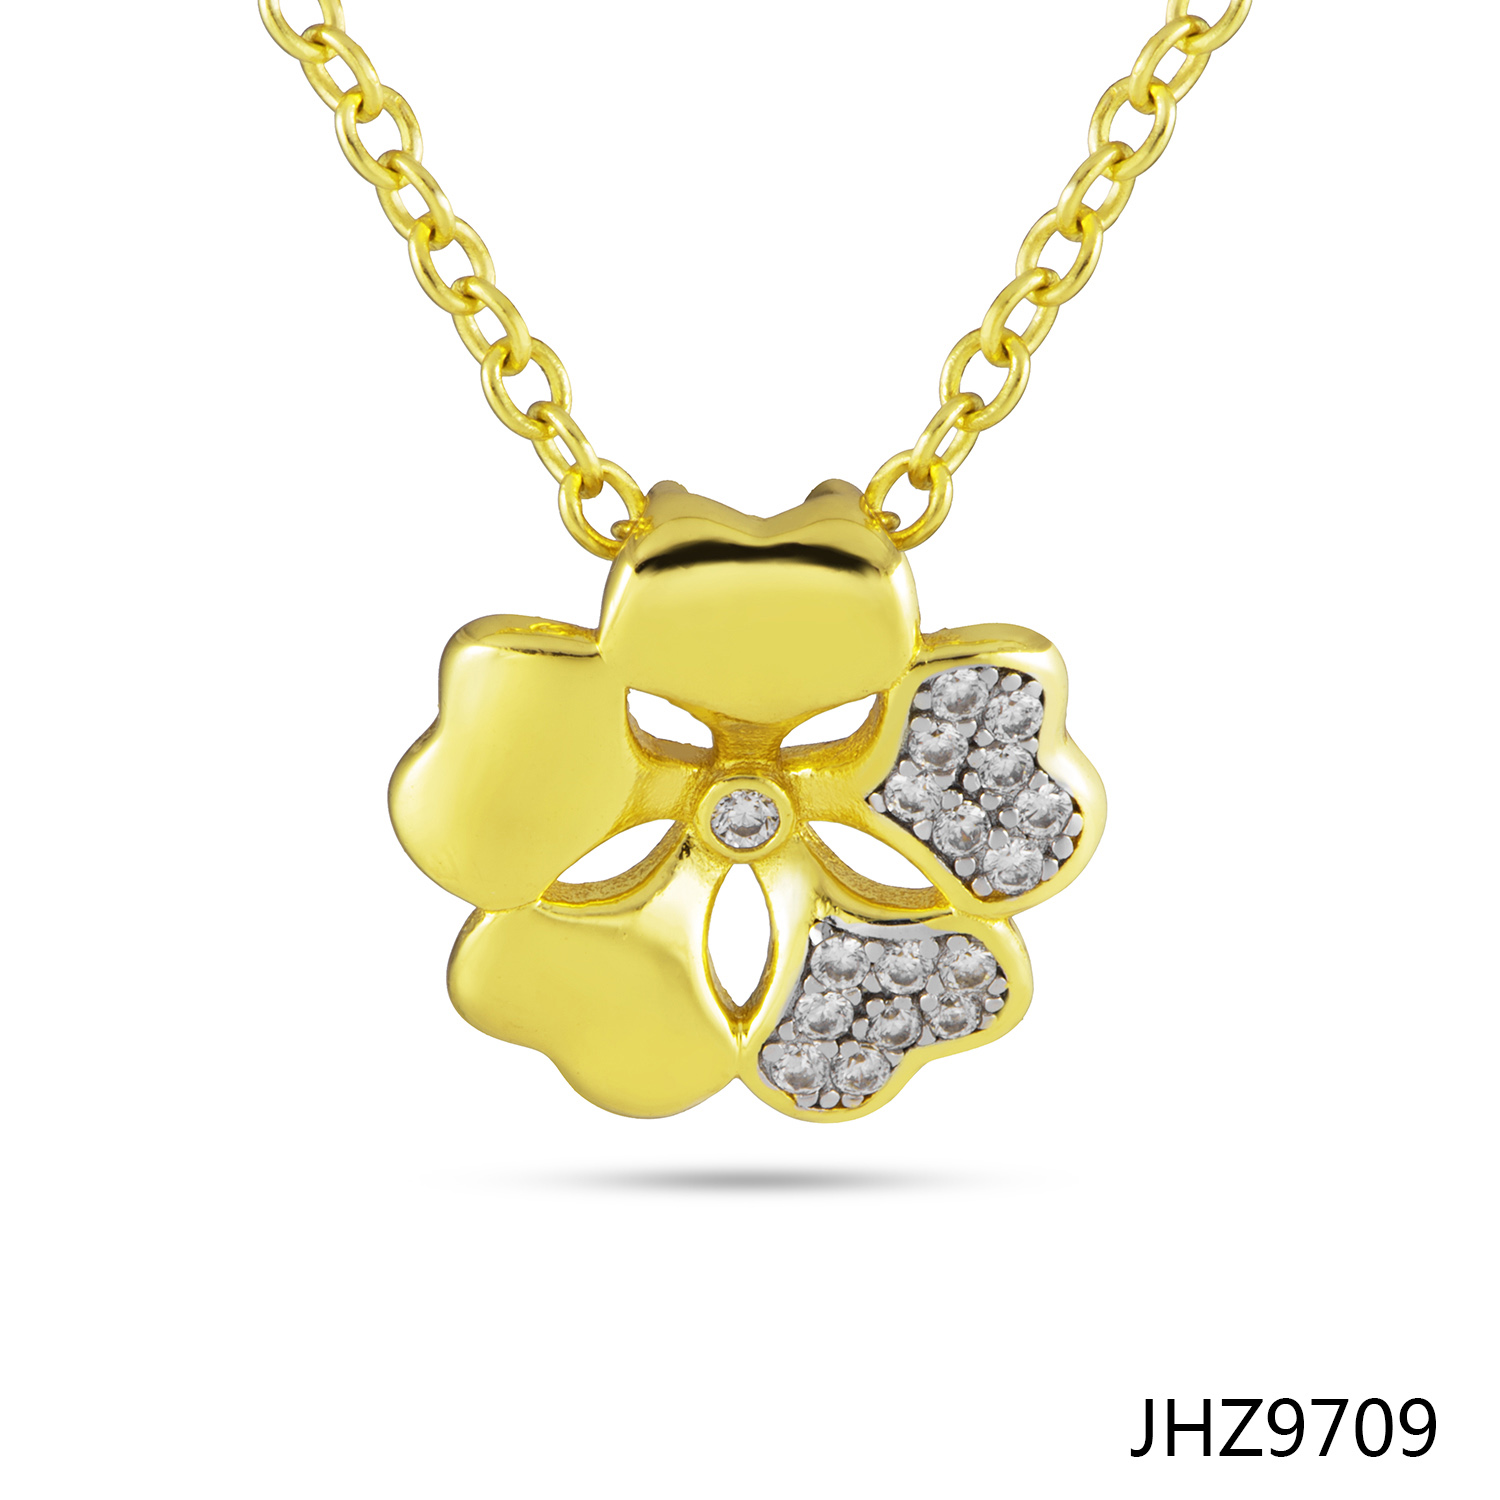 JASEN JEWELRY clover design lucky necklace for girls and women